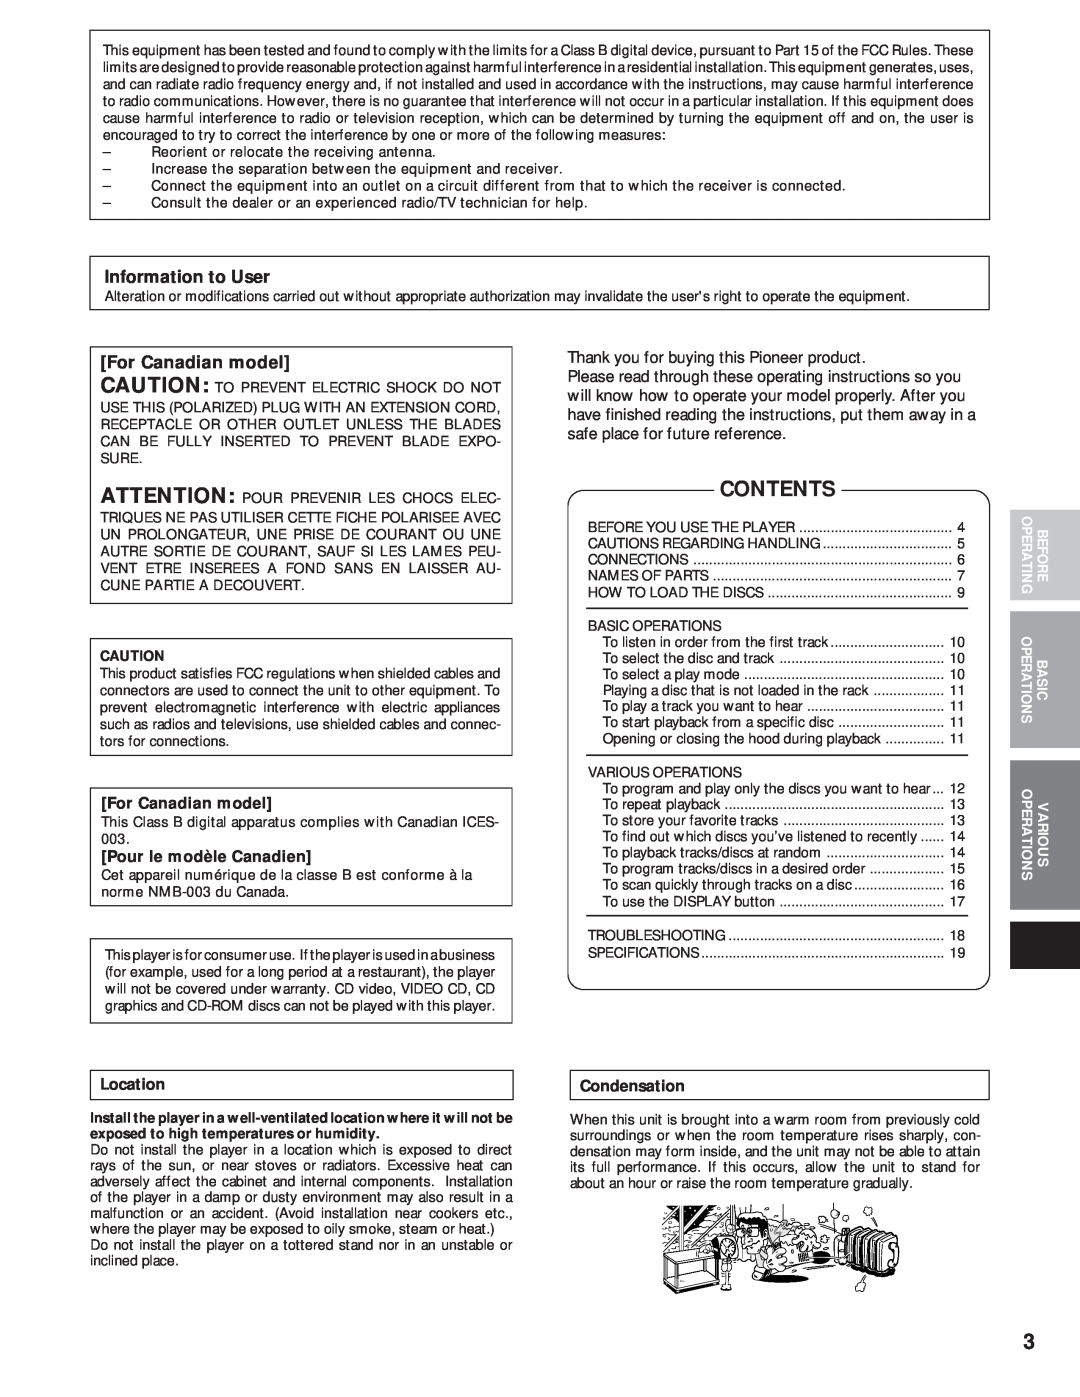 Pioneer PD-F1009 manual Contents, For Canadian model, Pour le modèle Canadien, Location, Condensation, Operations, Various 